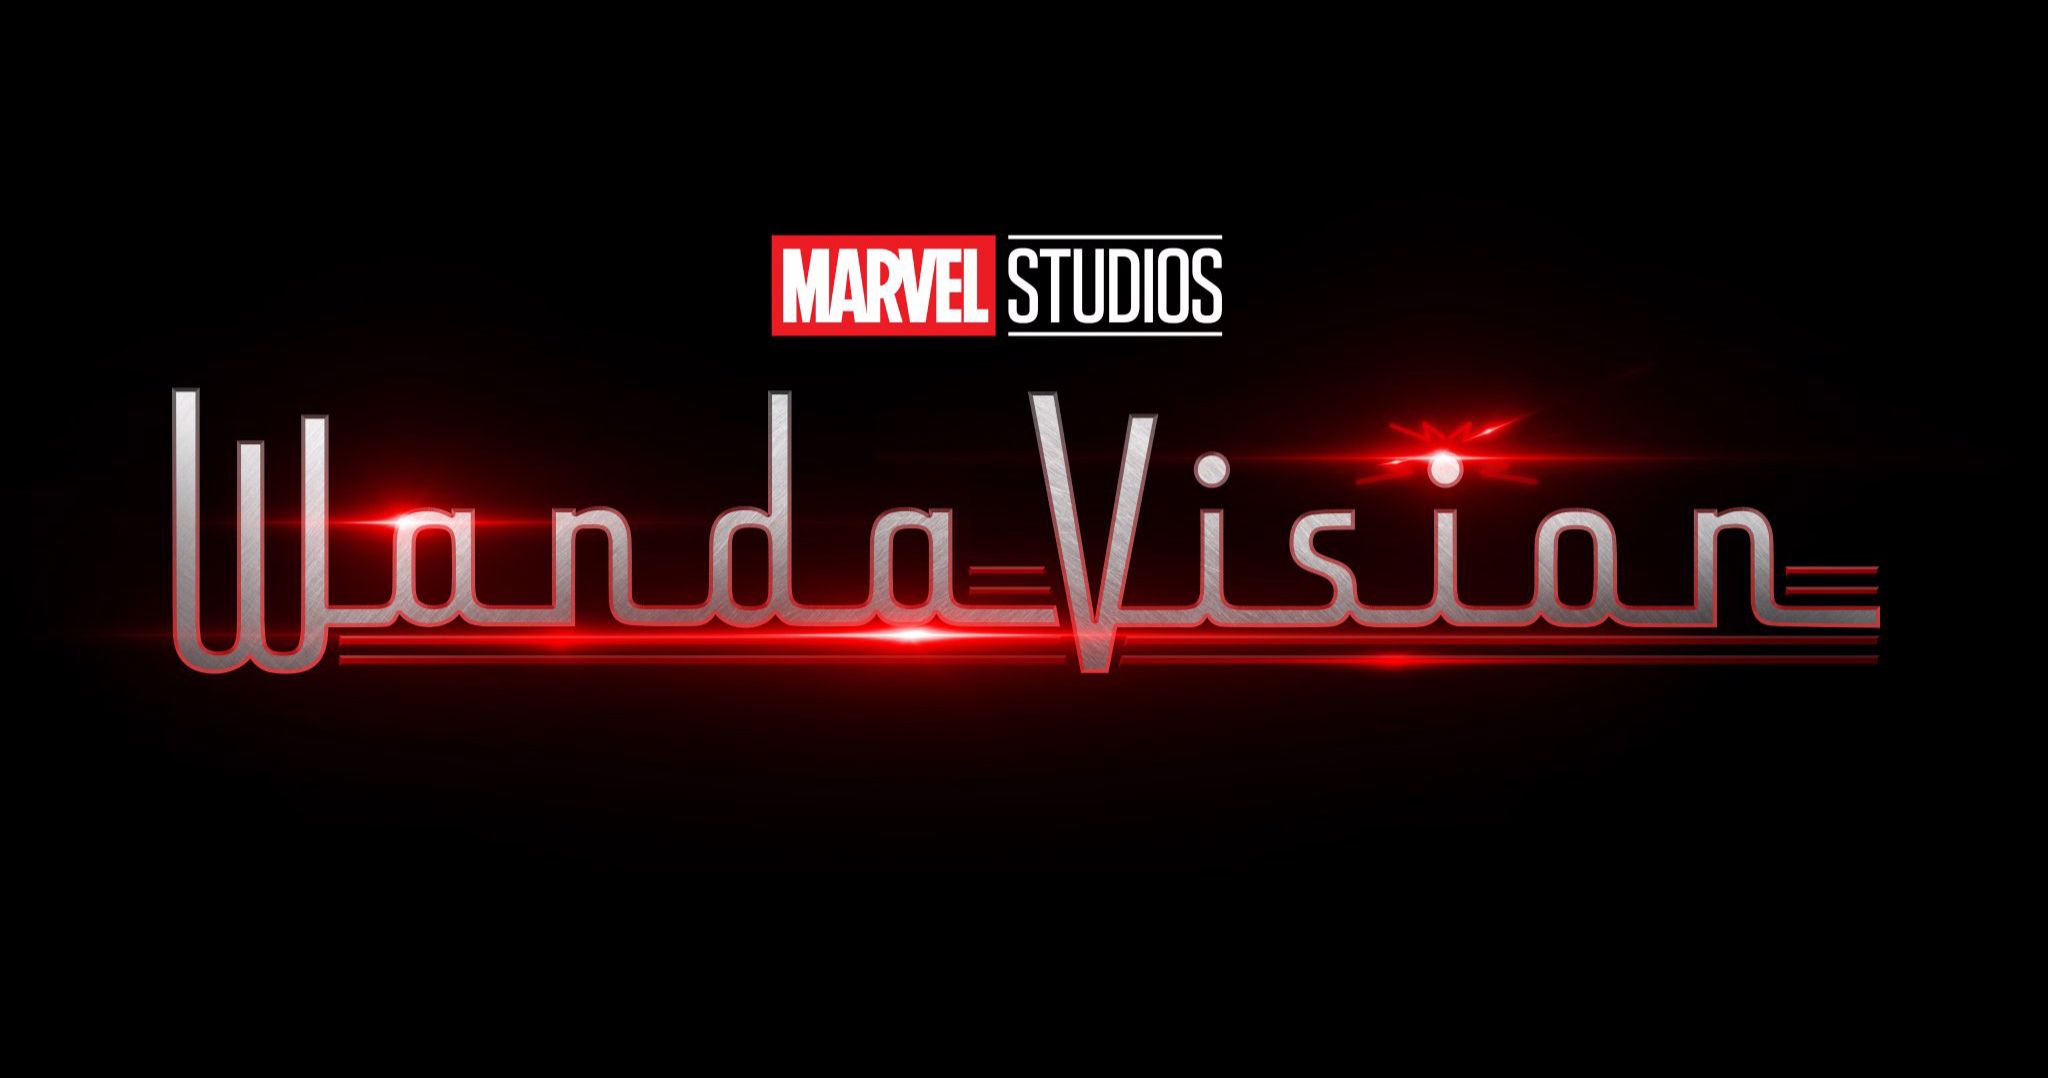 WandaVision Ties Directly Into Doctor Strange 2, Premieres Spring 2021